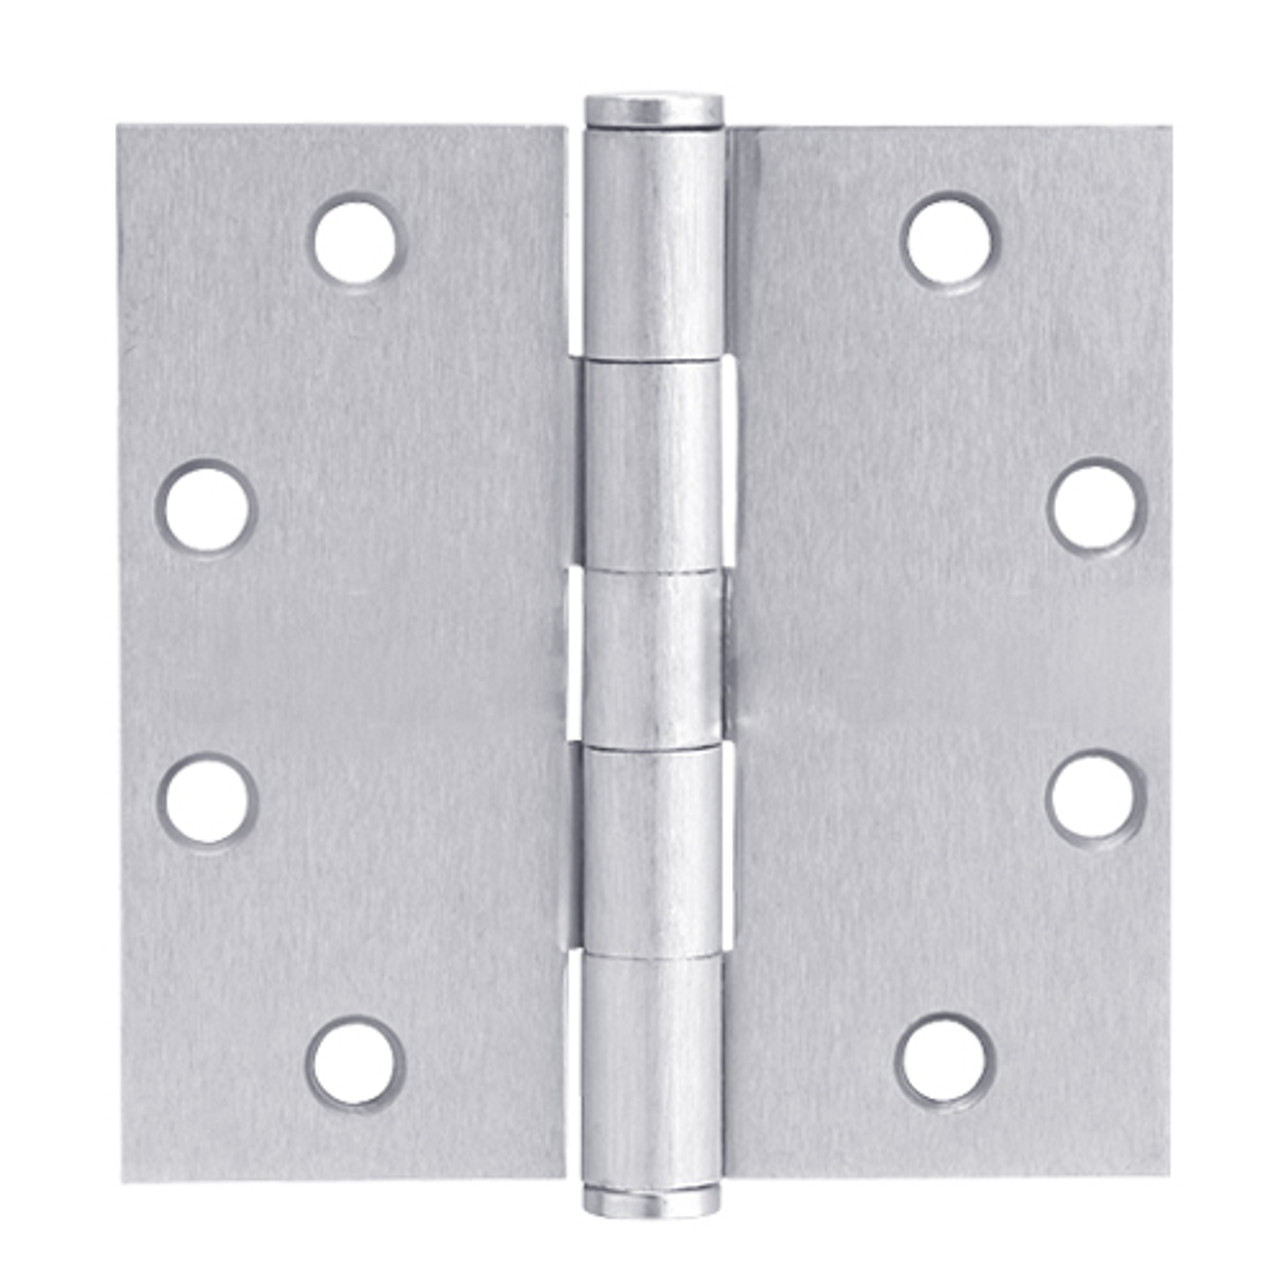 5PB1-3-5x3-5-651-NRP IVES 5 Knuckle Plain Bearing Full Mortise Hinge in Bright Chrome Plated